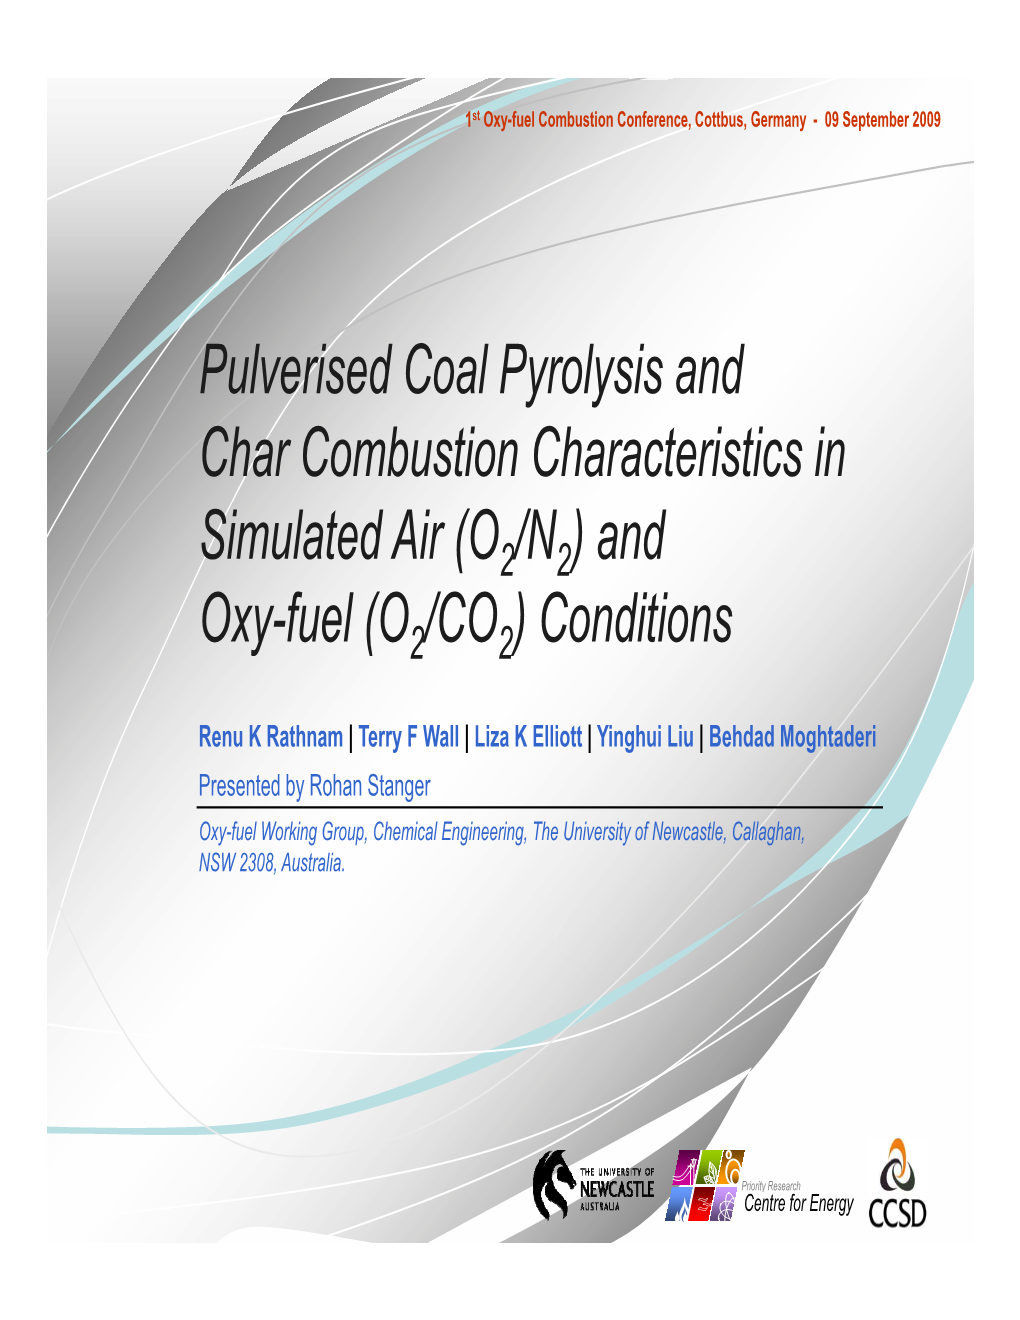 Pulverised Coal Pyrolysis and Char Combustion Characteristics In